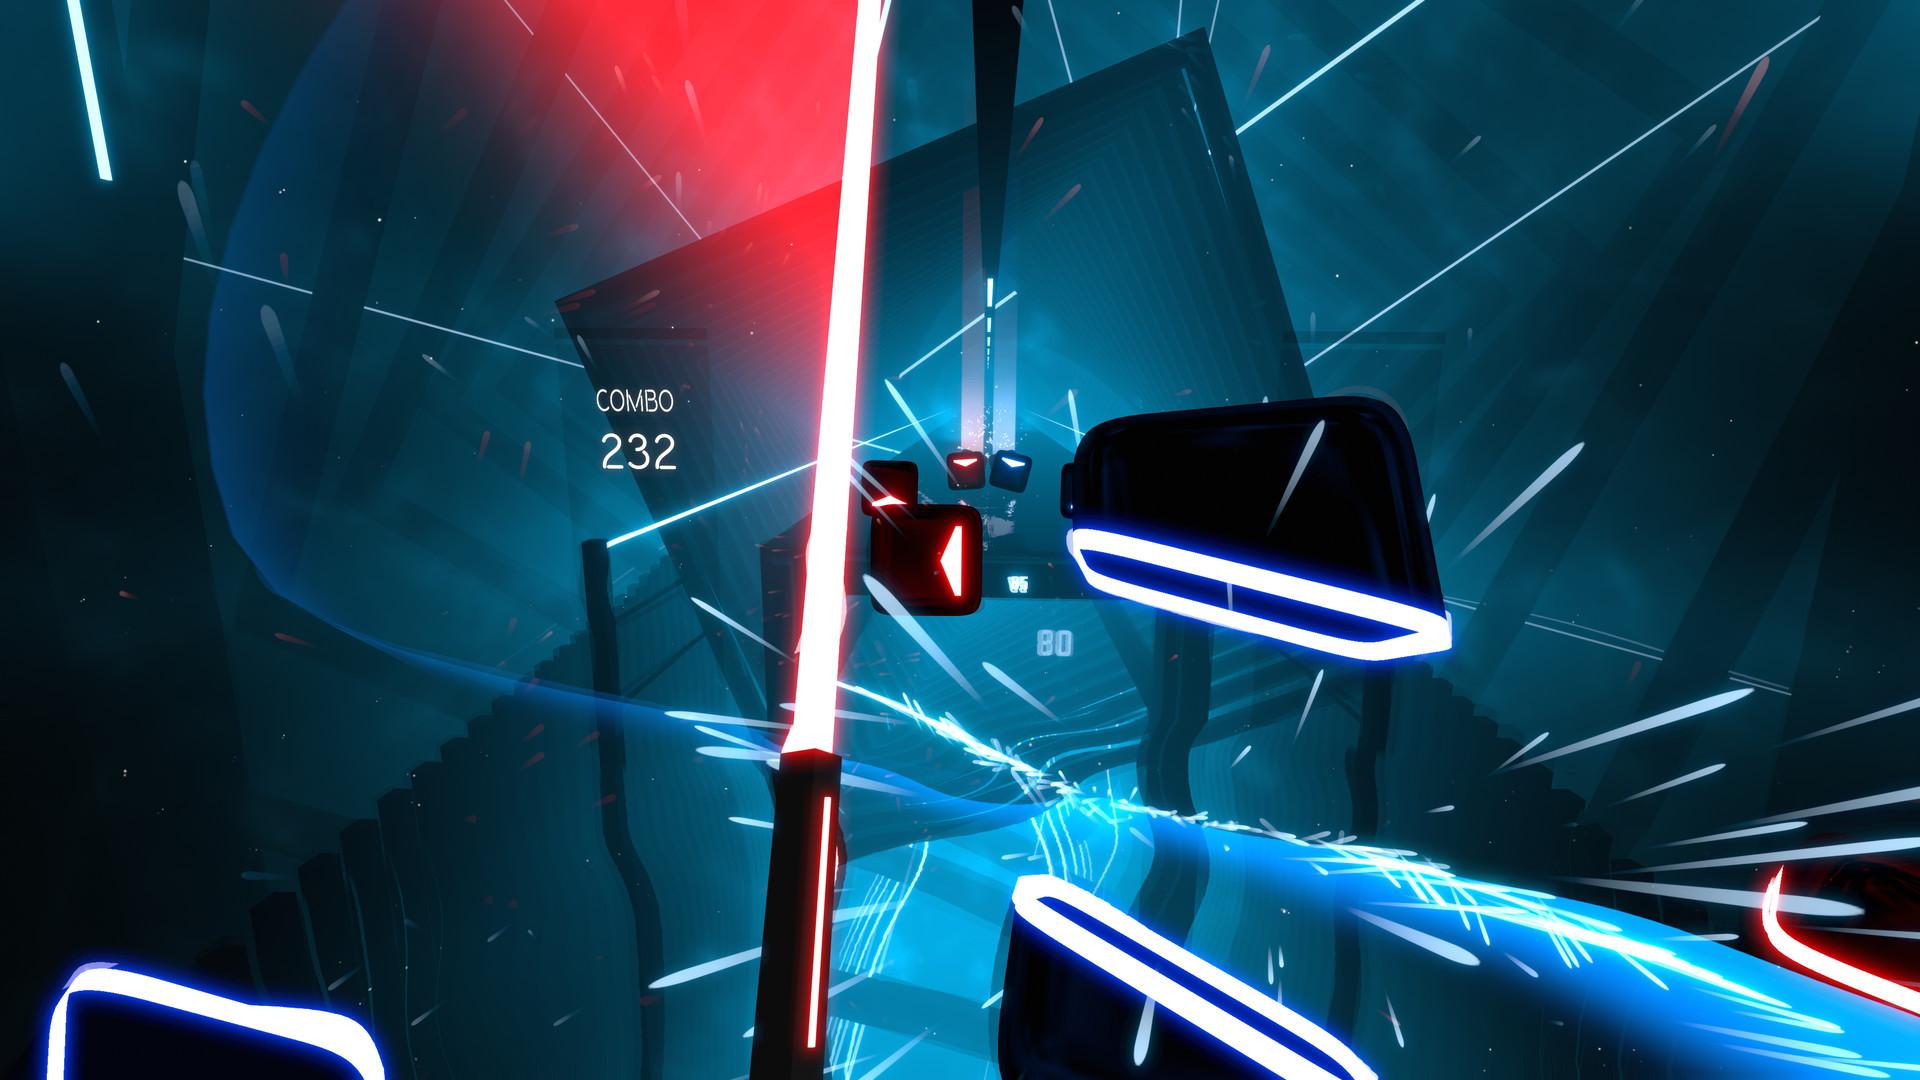 Download And Install New Custom Songs On Beat Saber - Winter 2021 Update